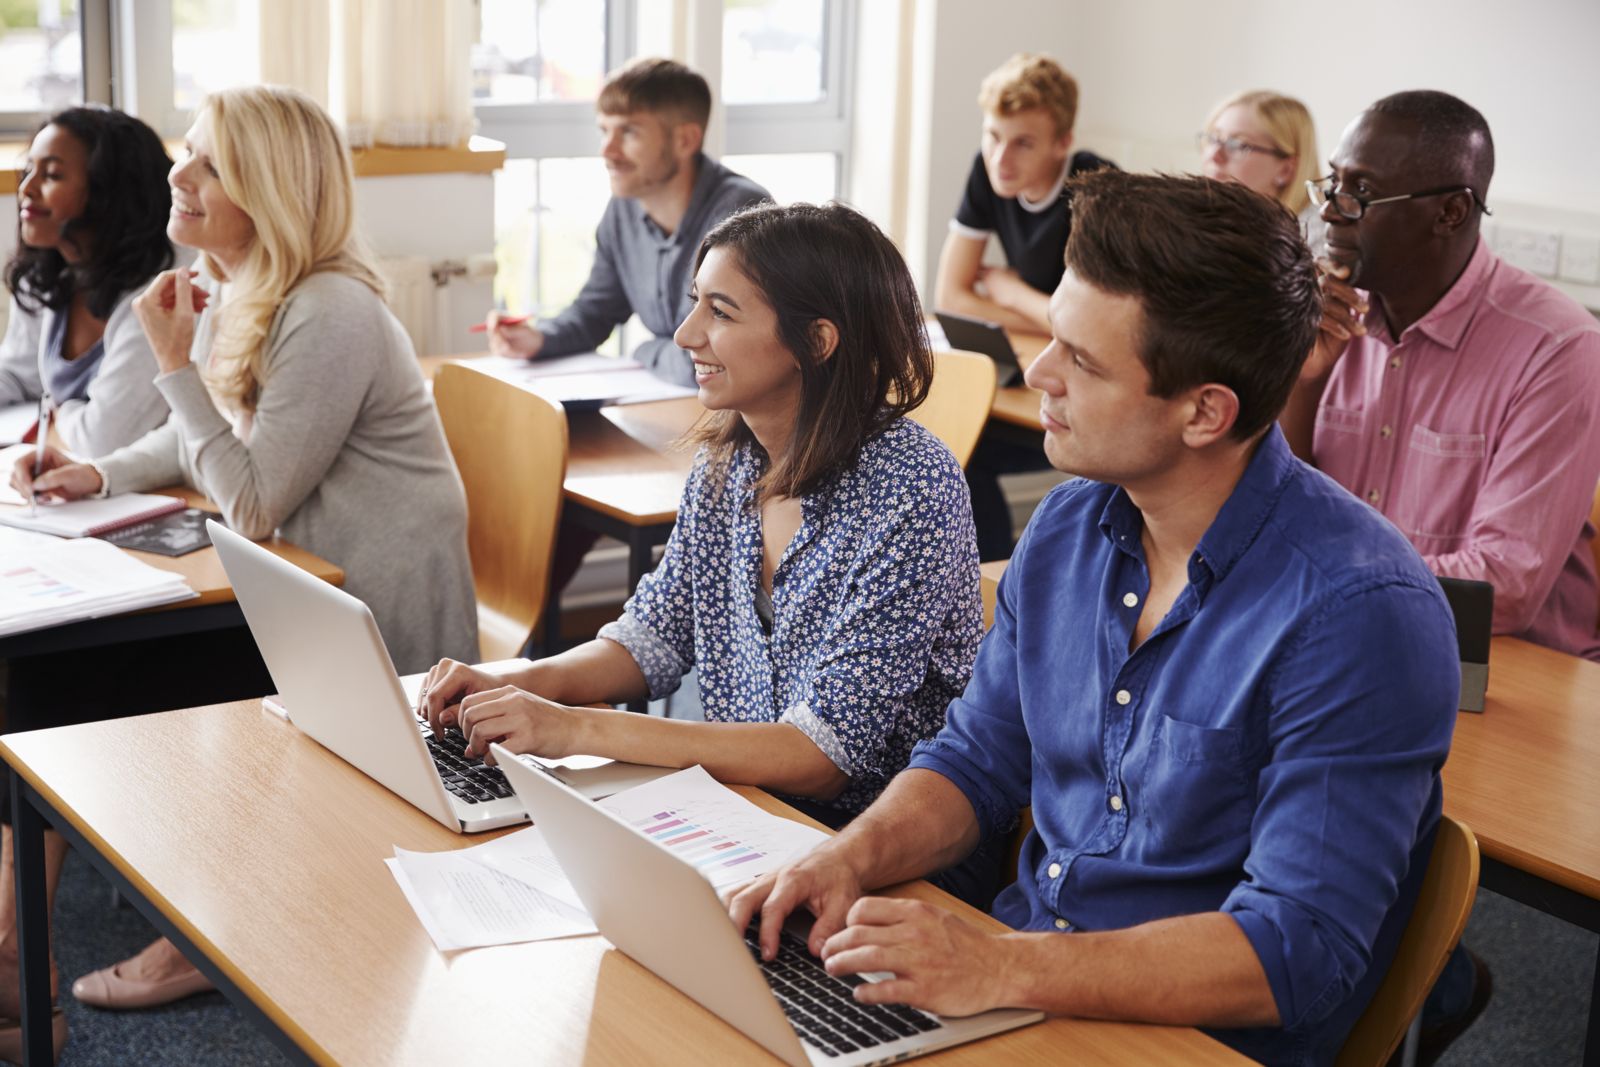 A mixed group of adults, sitting at desks in a classroom and directing their attention to the front of the sunny classroom. Some are taking notes on laptops, others on paper, and others are not taking notes.